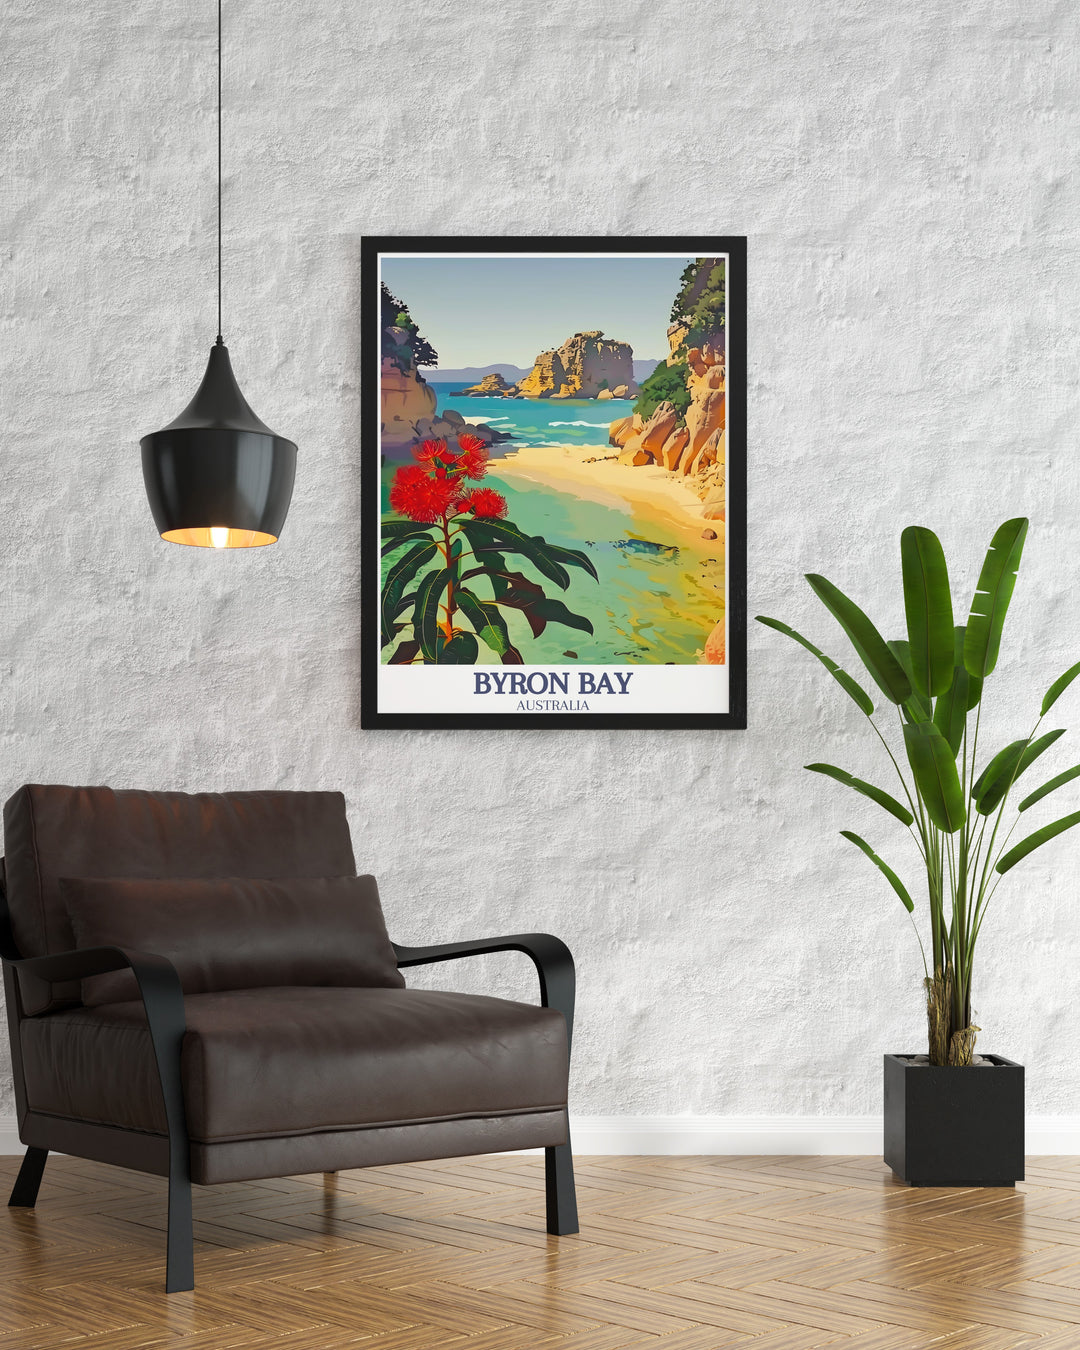 Colorful Byron Bay Wall Art showcasing The Pass, Byron beach a versatile piece for any interior design. This fine line print brings the lively and serene ambiance of Byron Bay to your space.